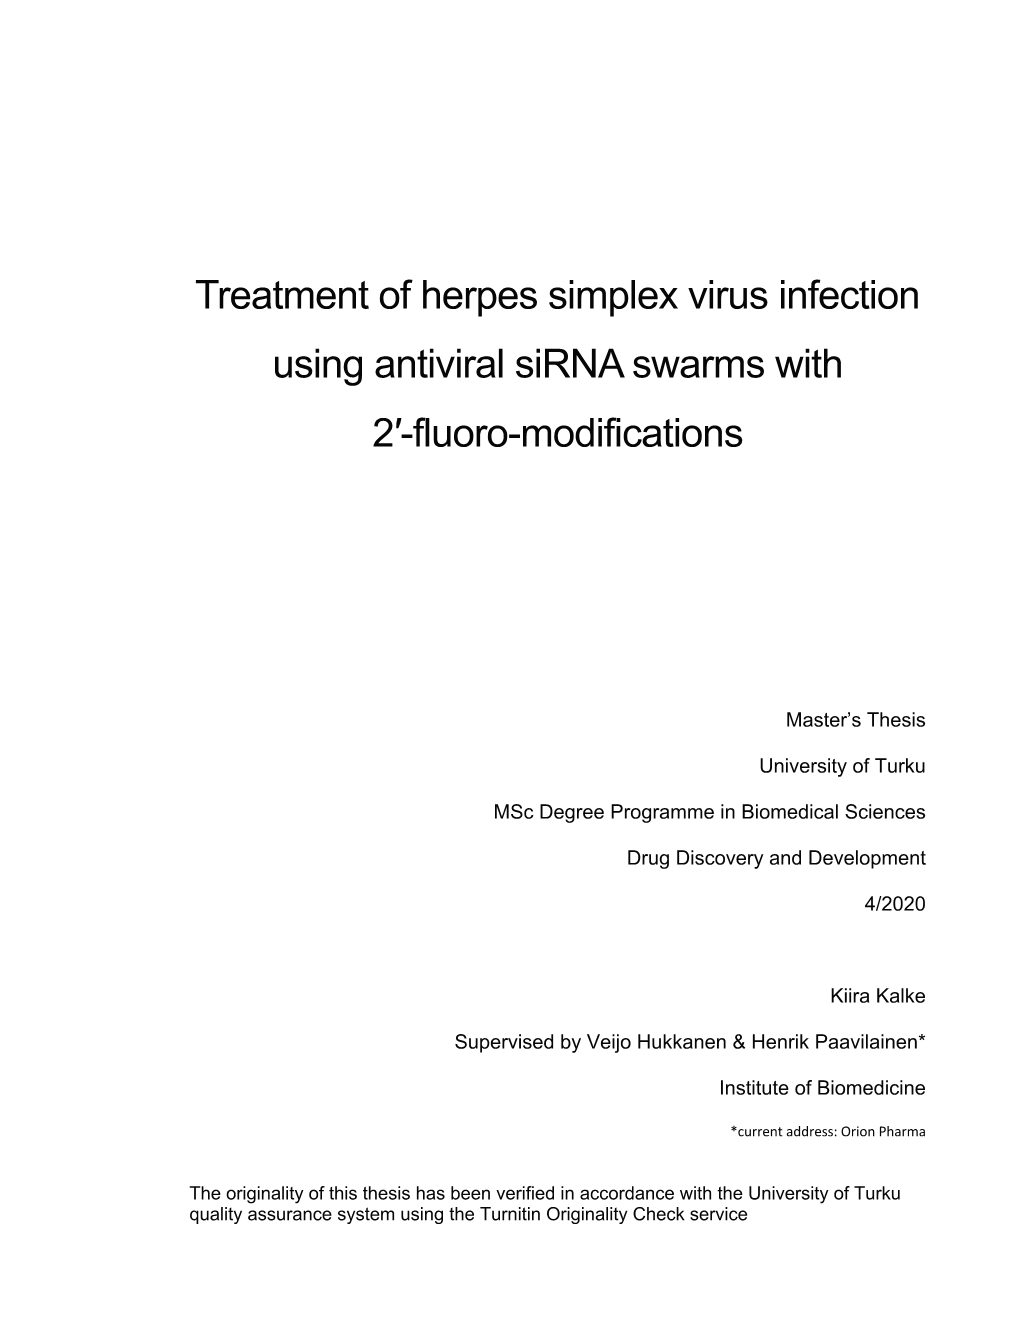 Treatment of Herpes Simplex Virus Infection Using Antiviral Sirna Swarms with 2′-Fluoro-Modifications